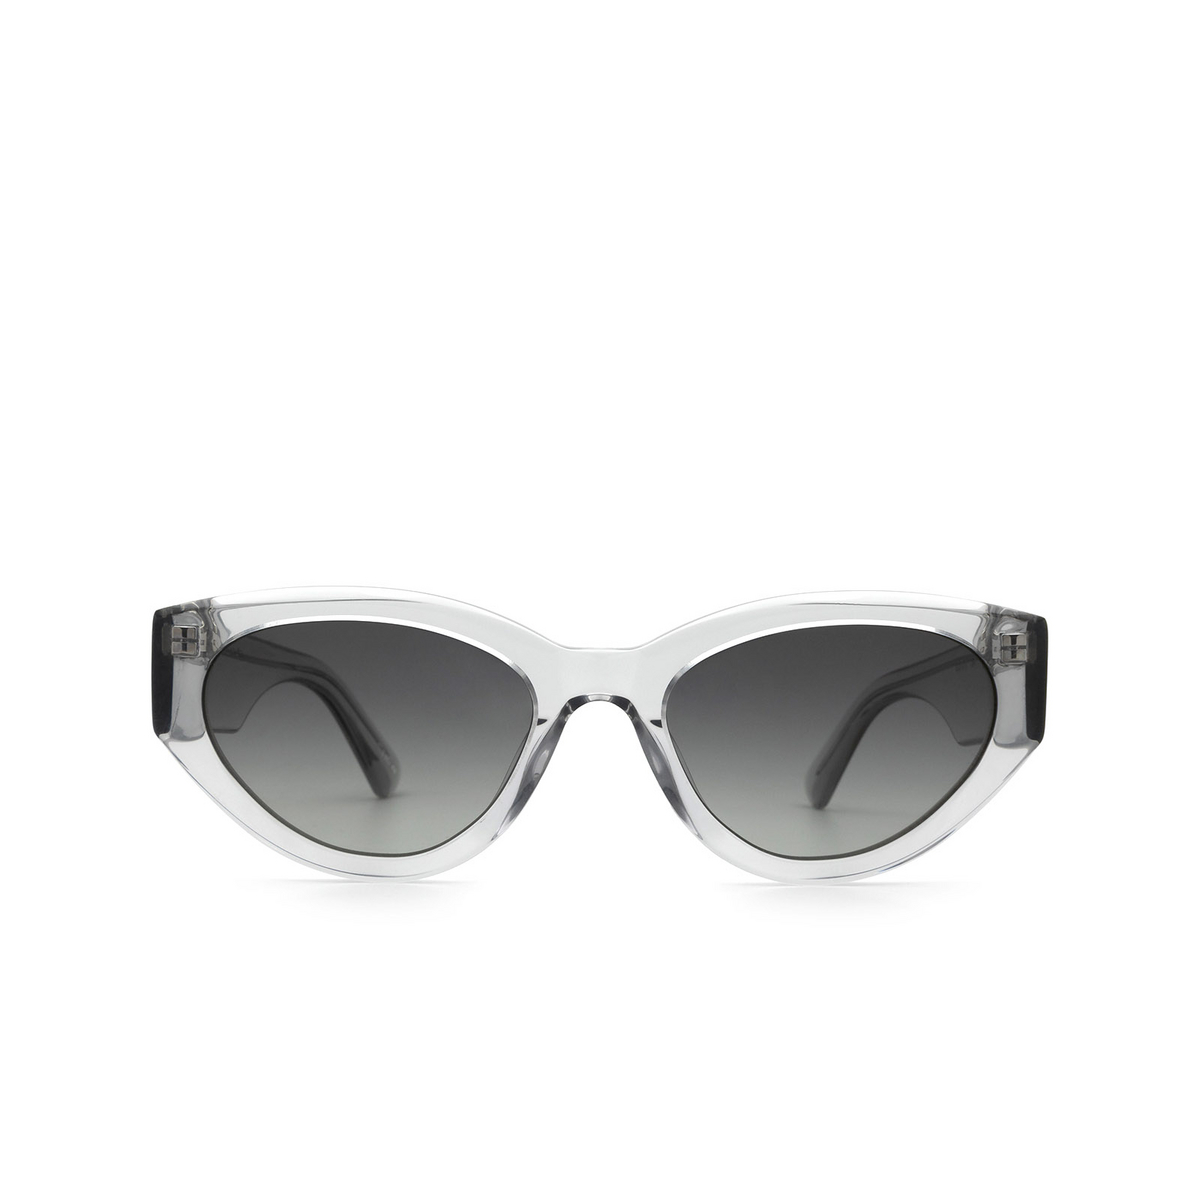 Chimi® Cat-eye Sunglasses: 06 color Grey - front view.